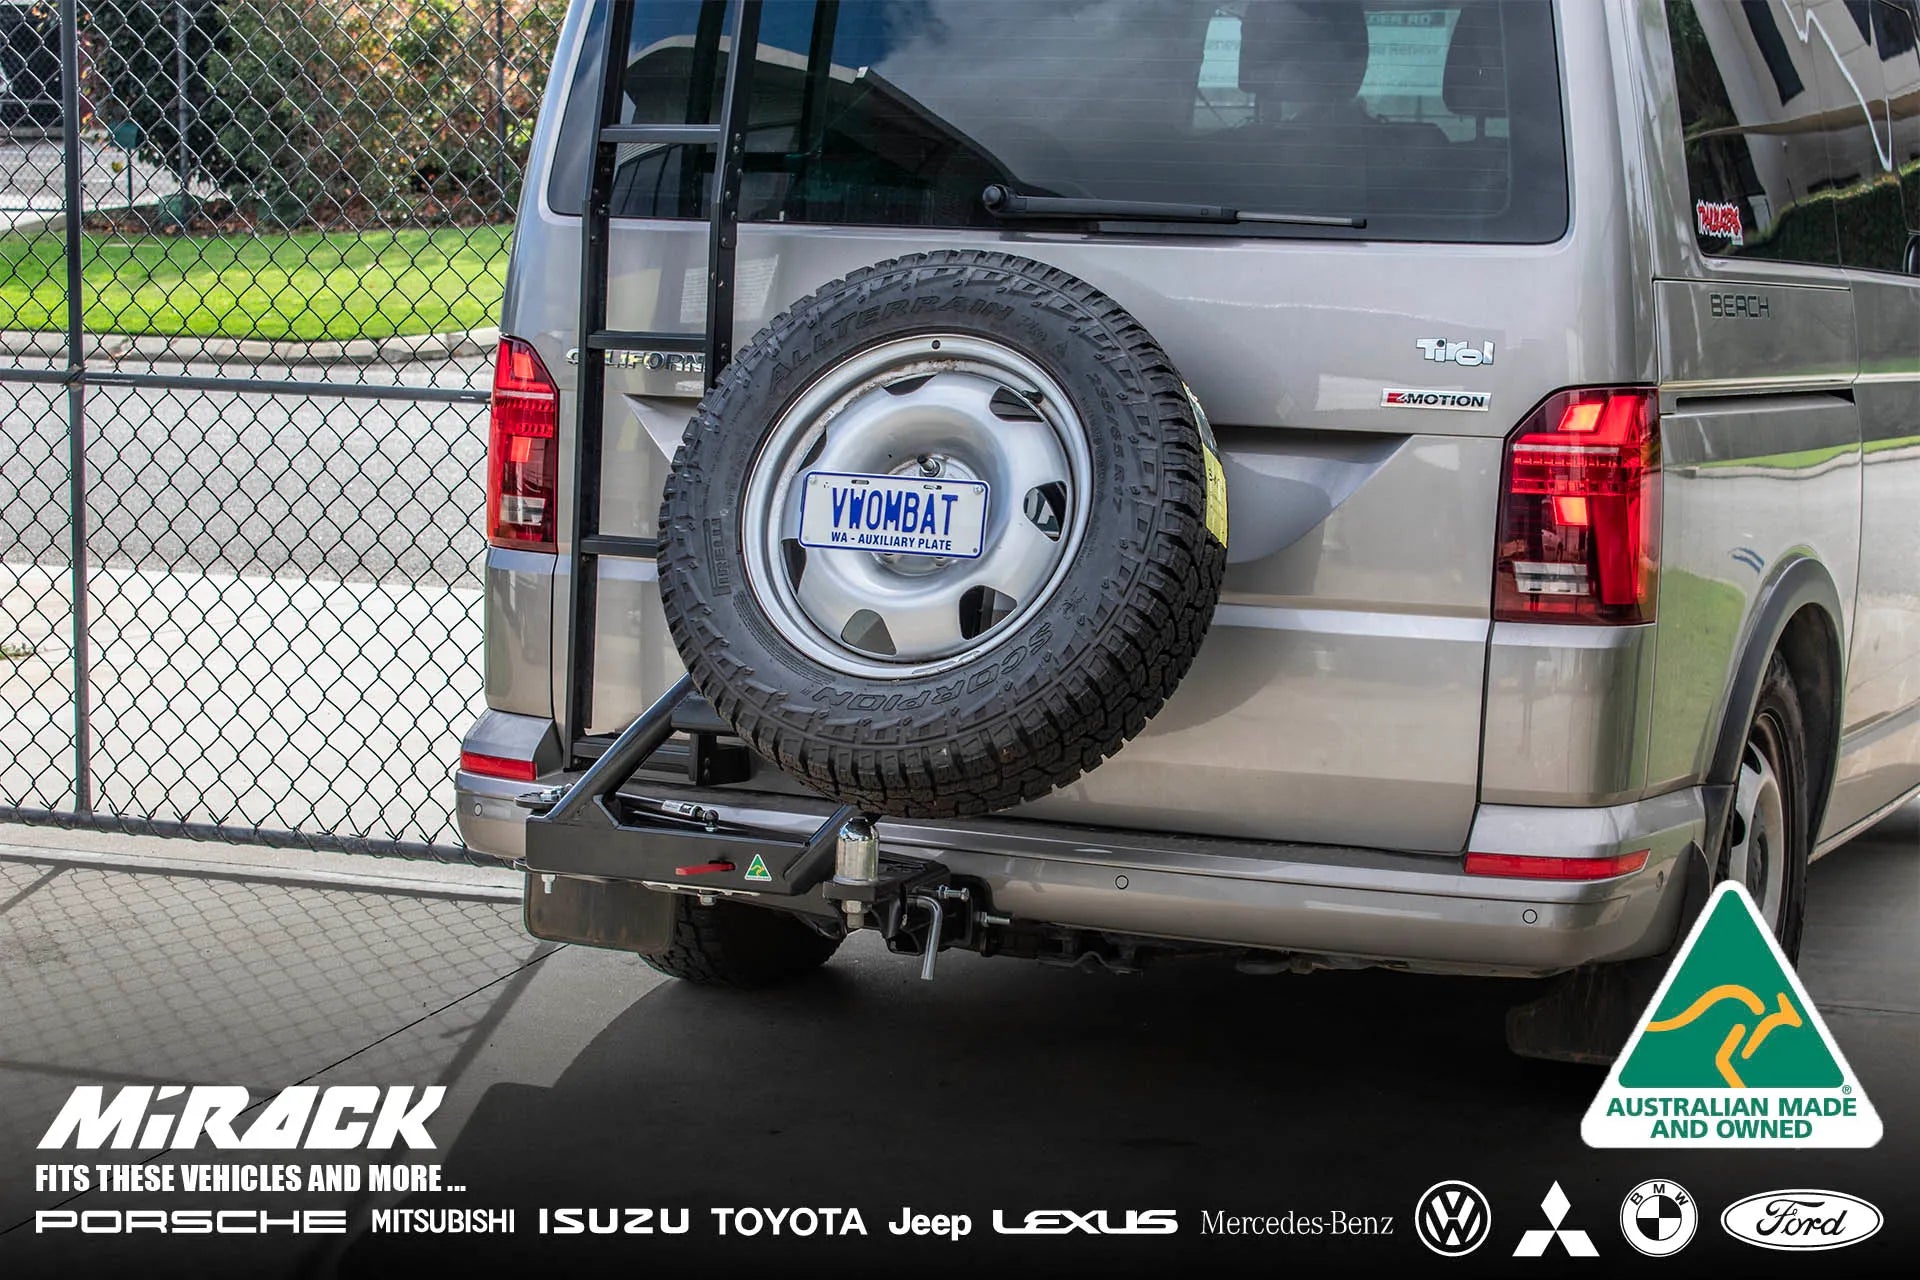 Conquer off-road adventures with your VW California. This Mirack swinging spare wheel carrier keeps the spare accessible and frees up rear space.